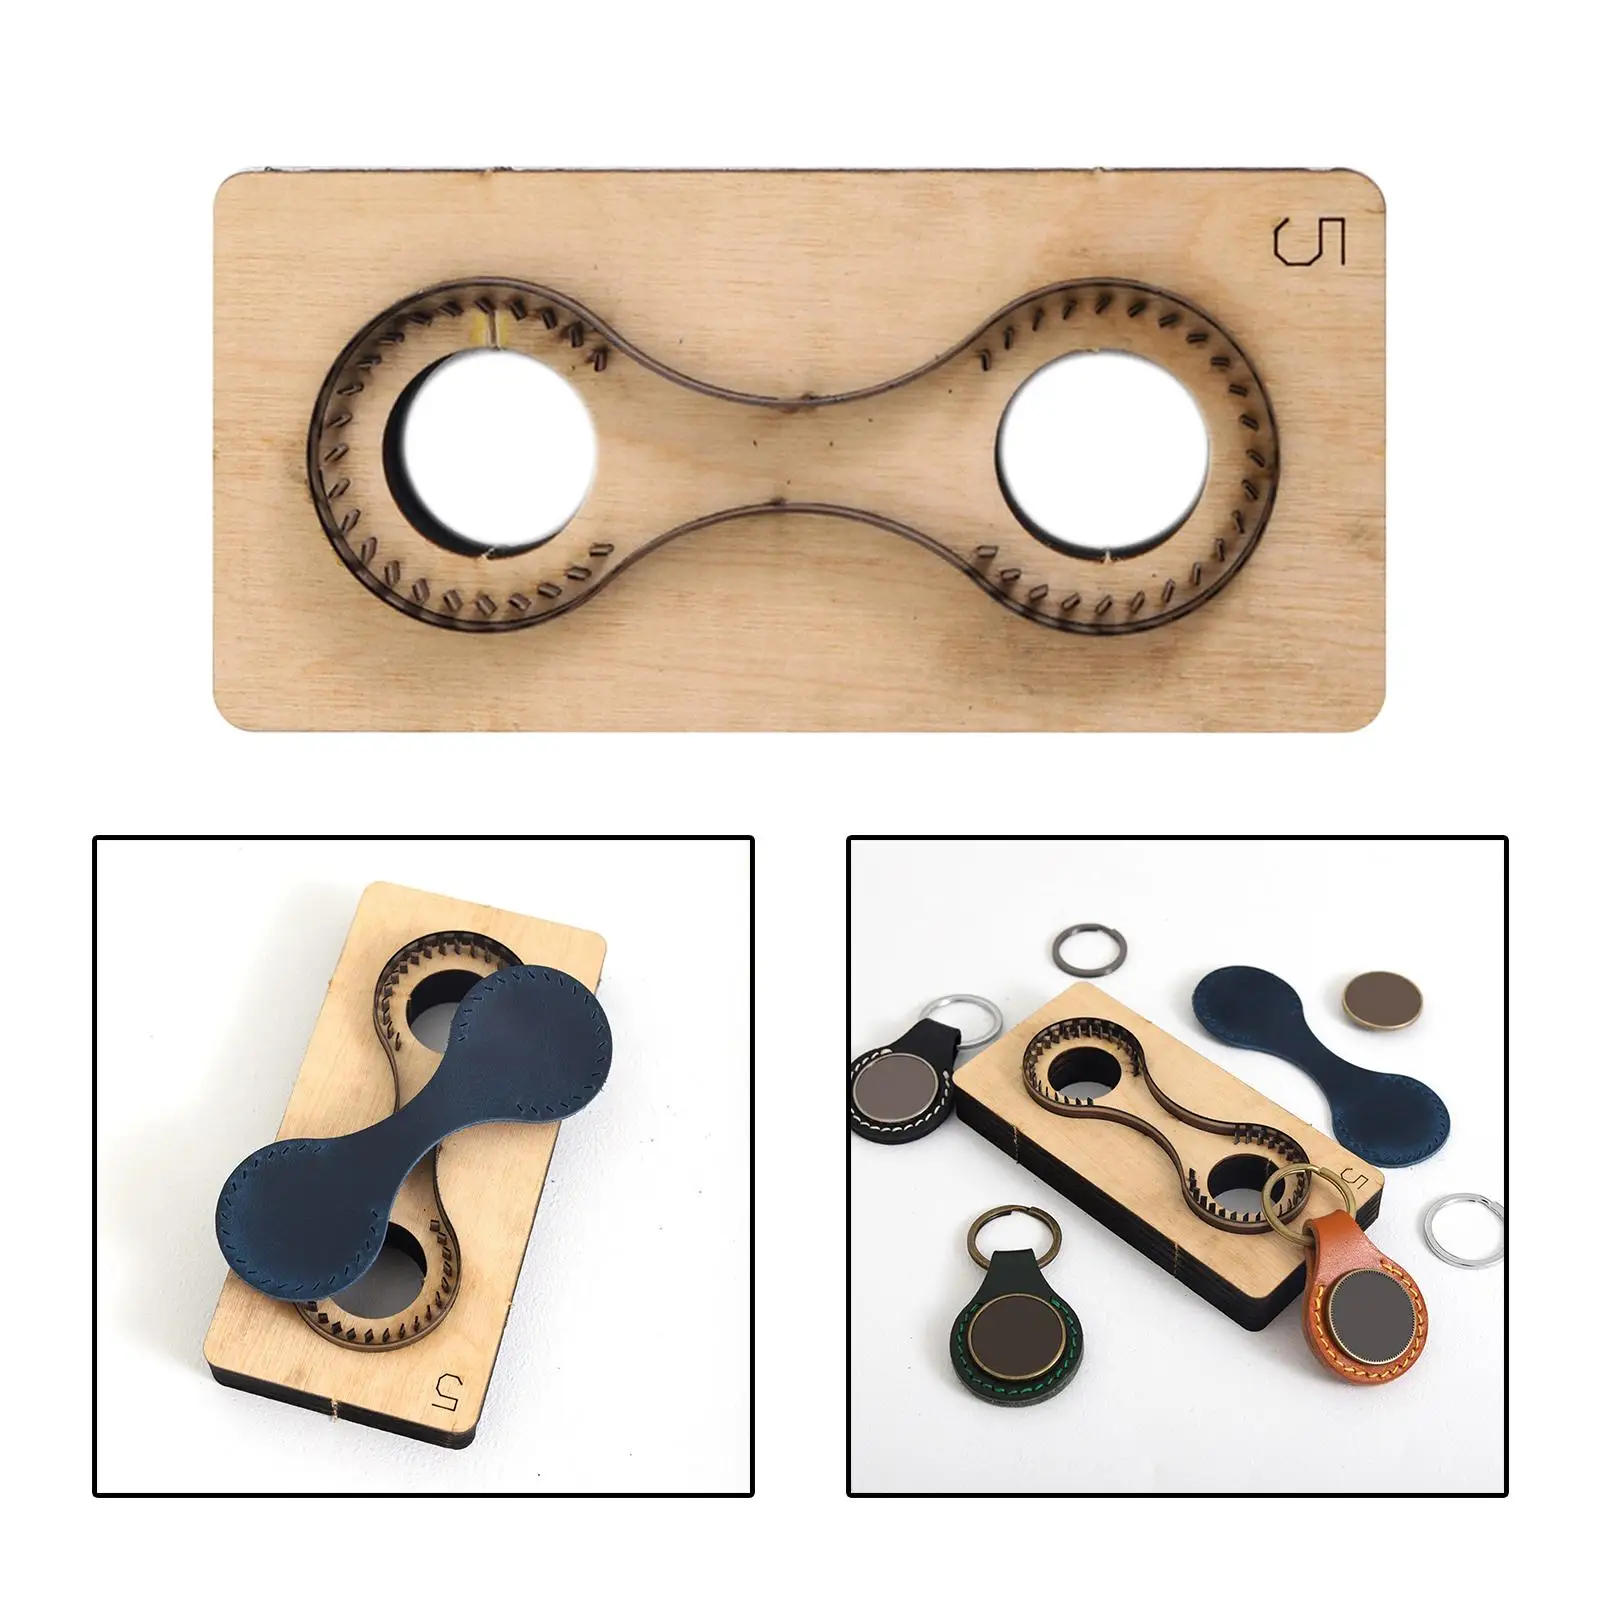 Metal Cutting Dies Key Ring 1Pcs Hand Punch Knife Mould Tool Set Template Craft DIY Wooden Cutter for Leathercraft Keychain